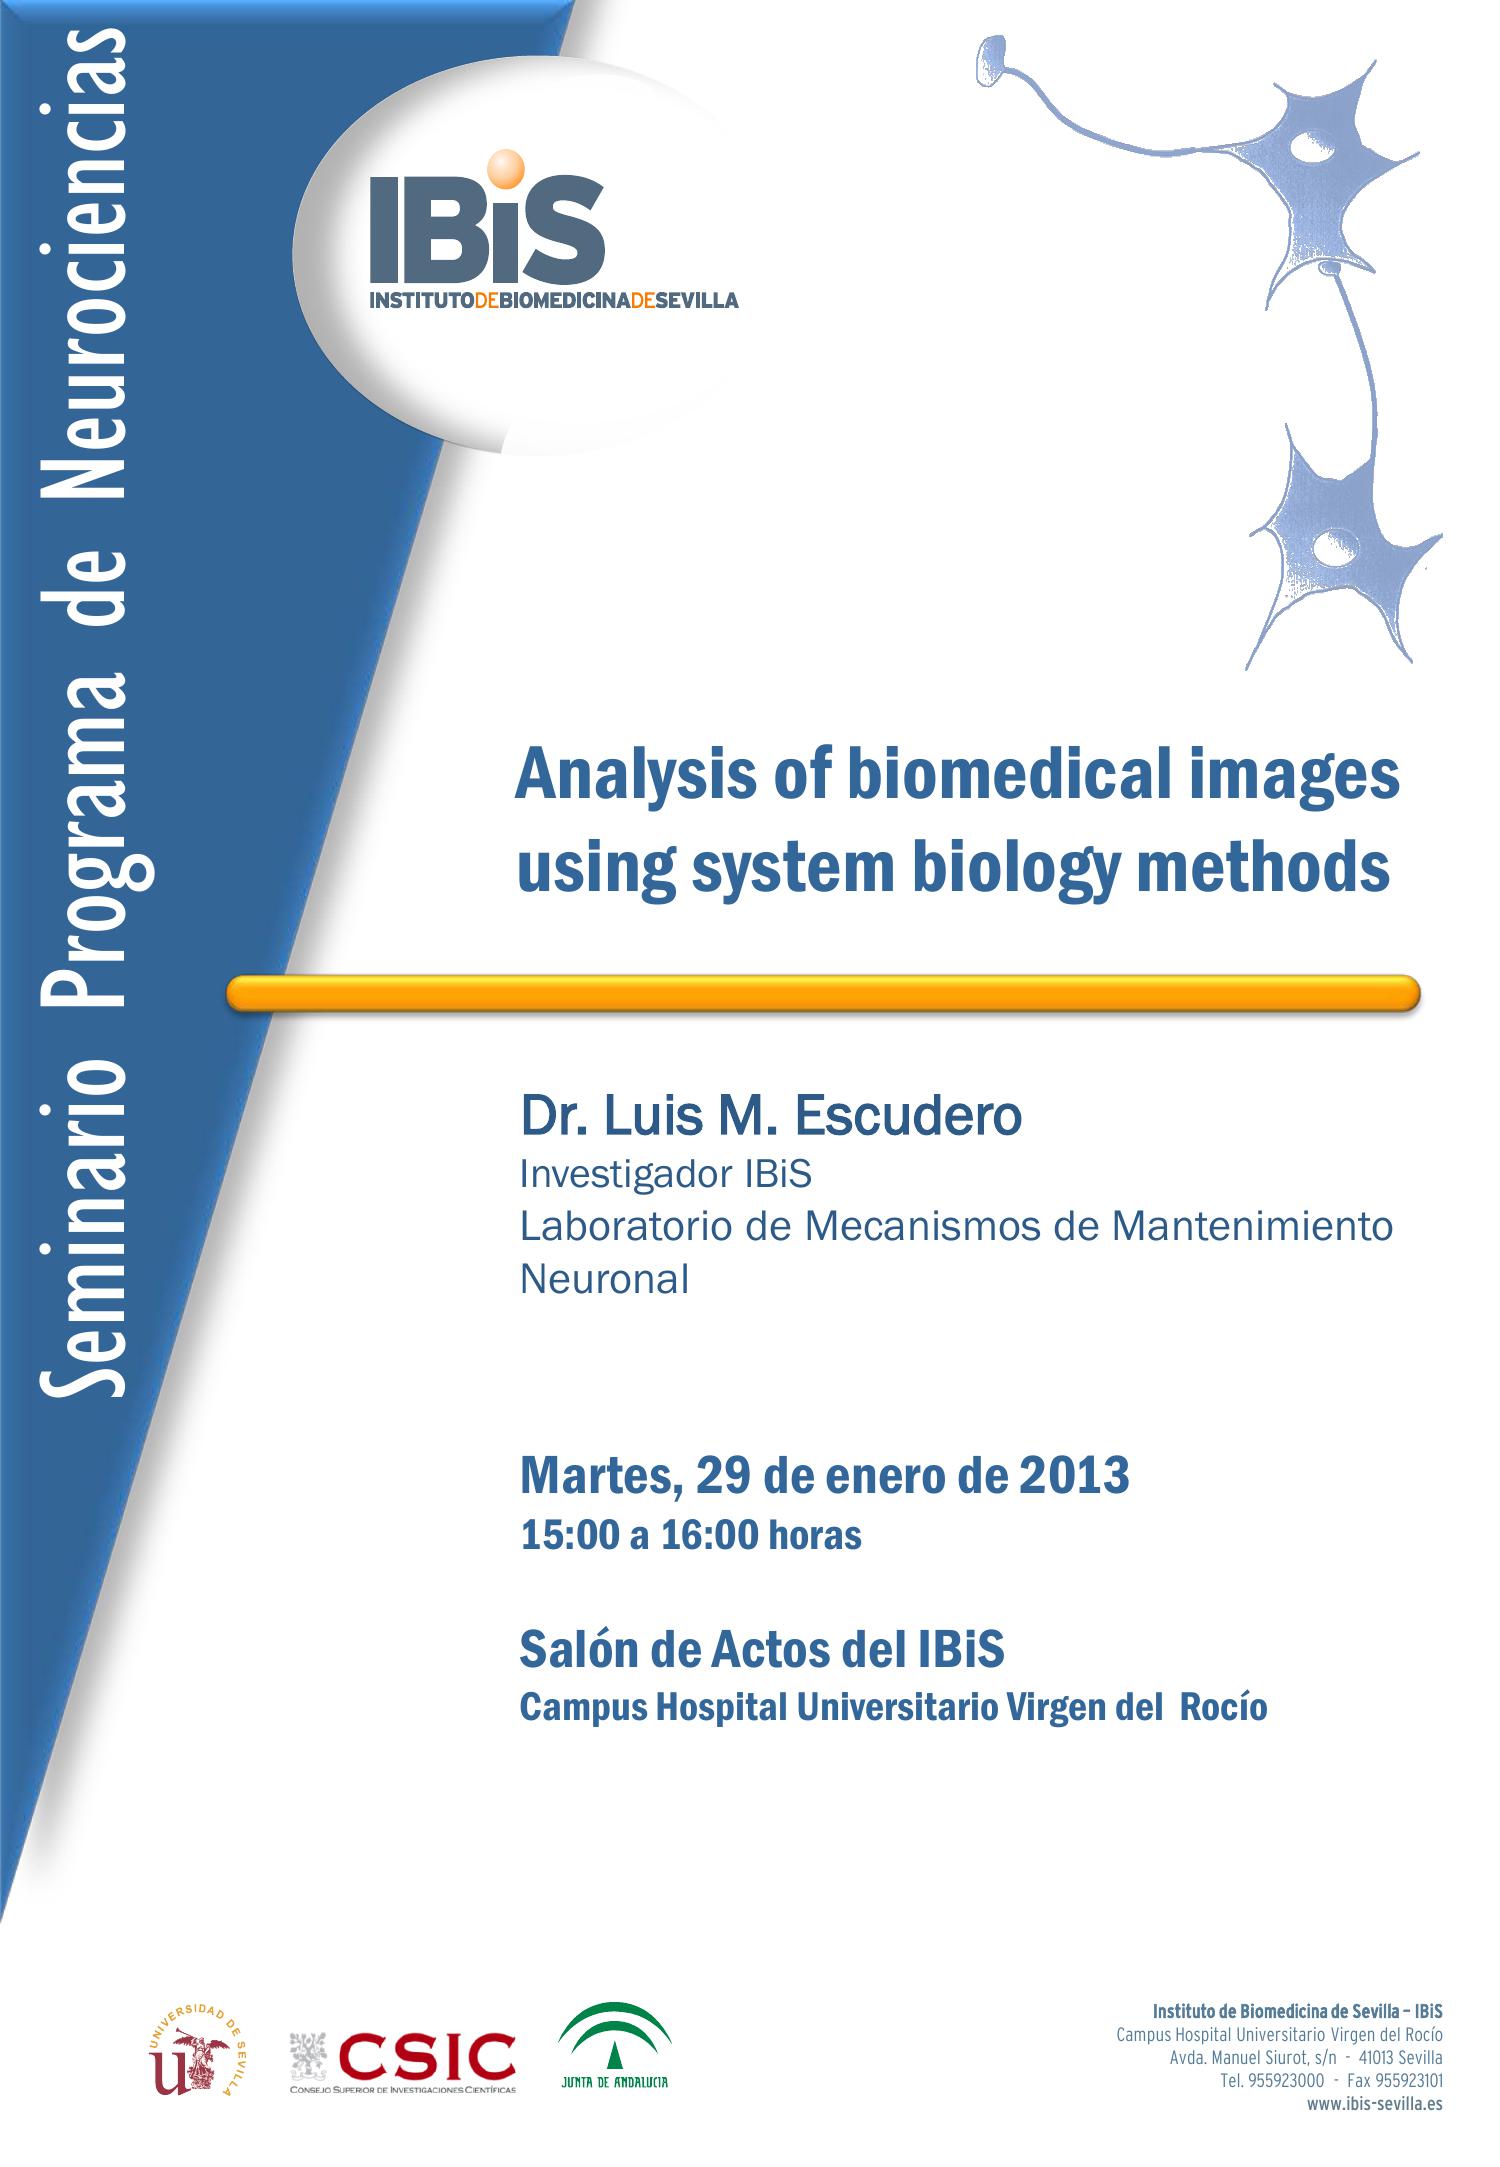 Poster: Analysis of biomedical images using system biology methods.